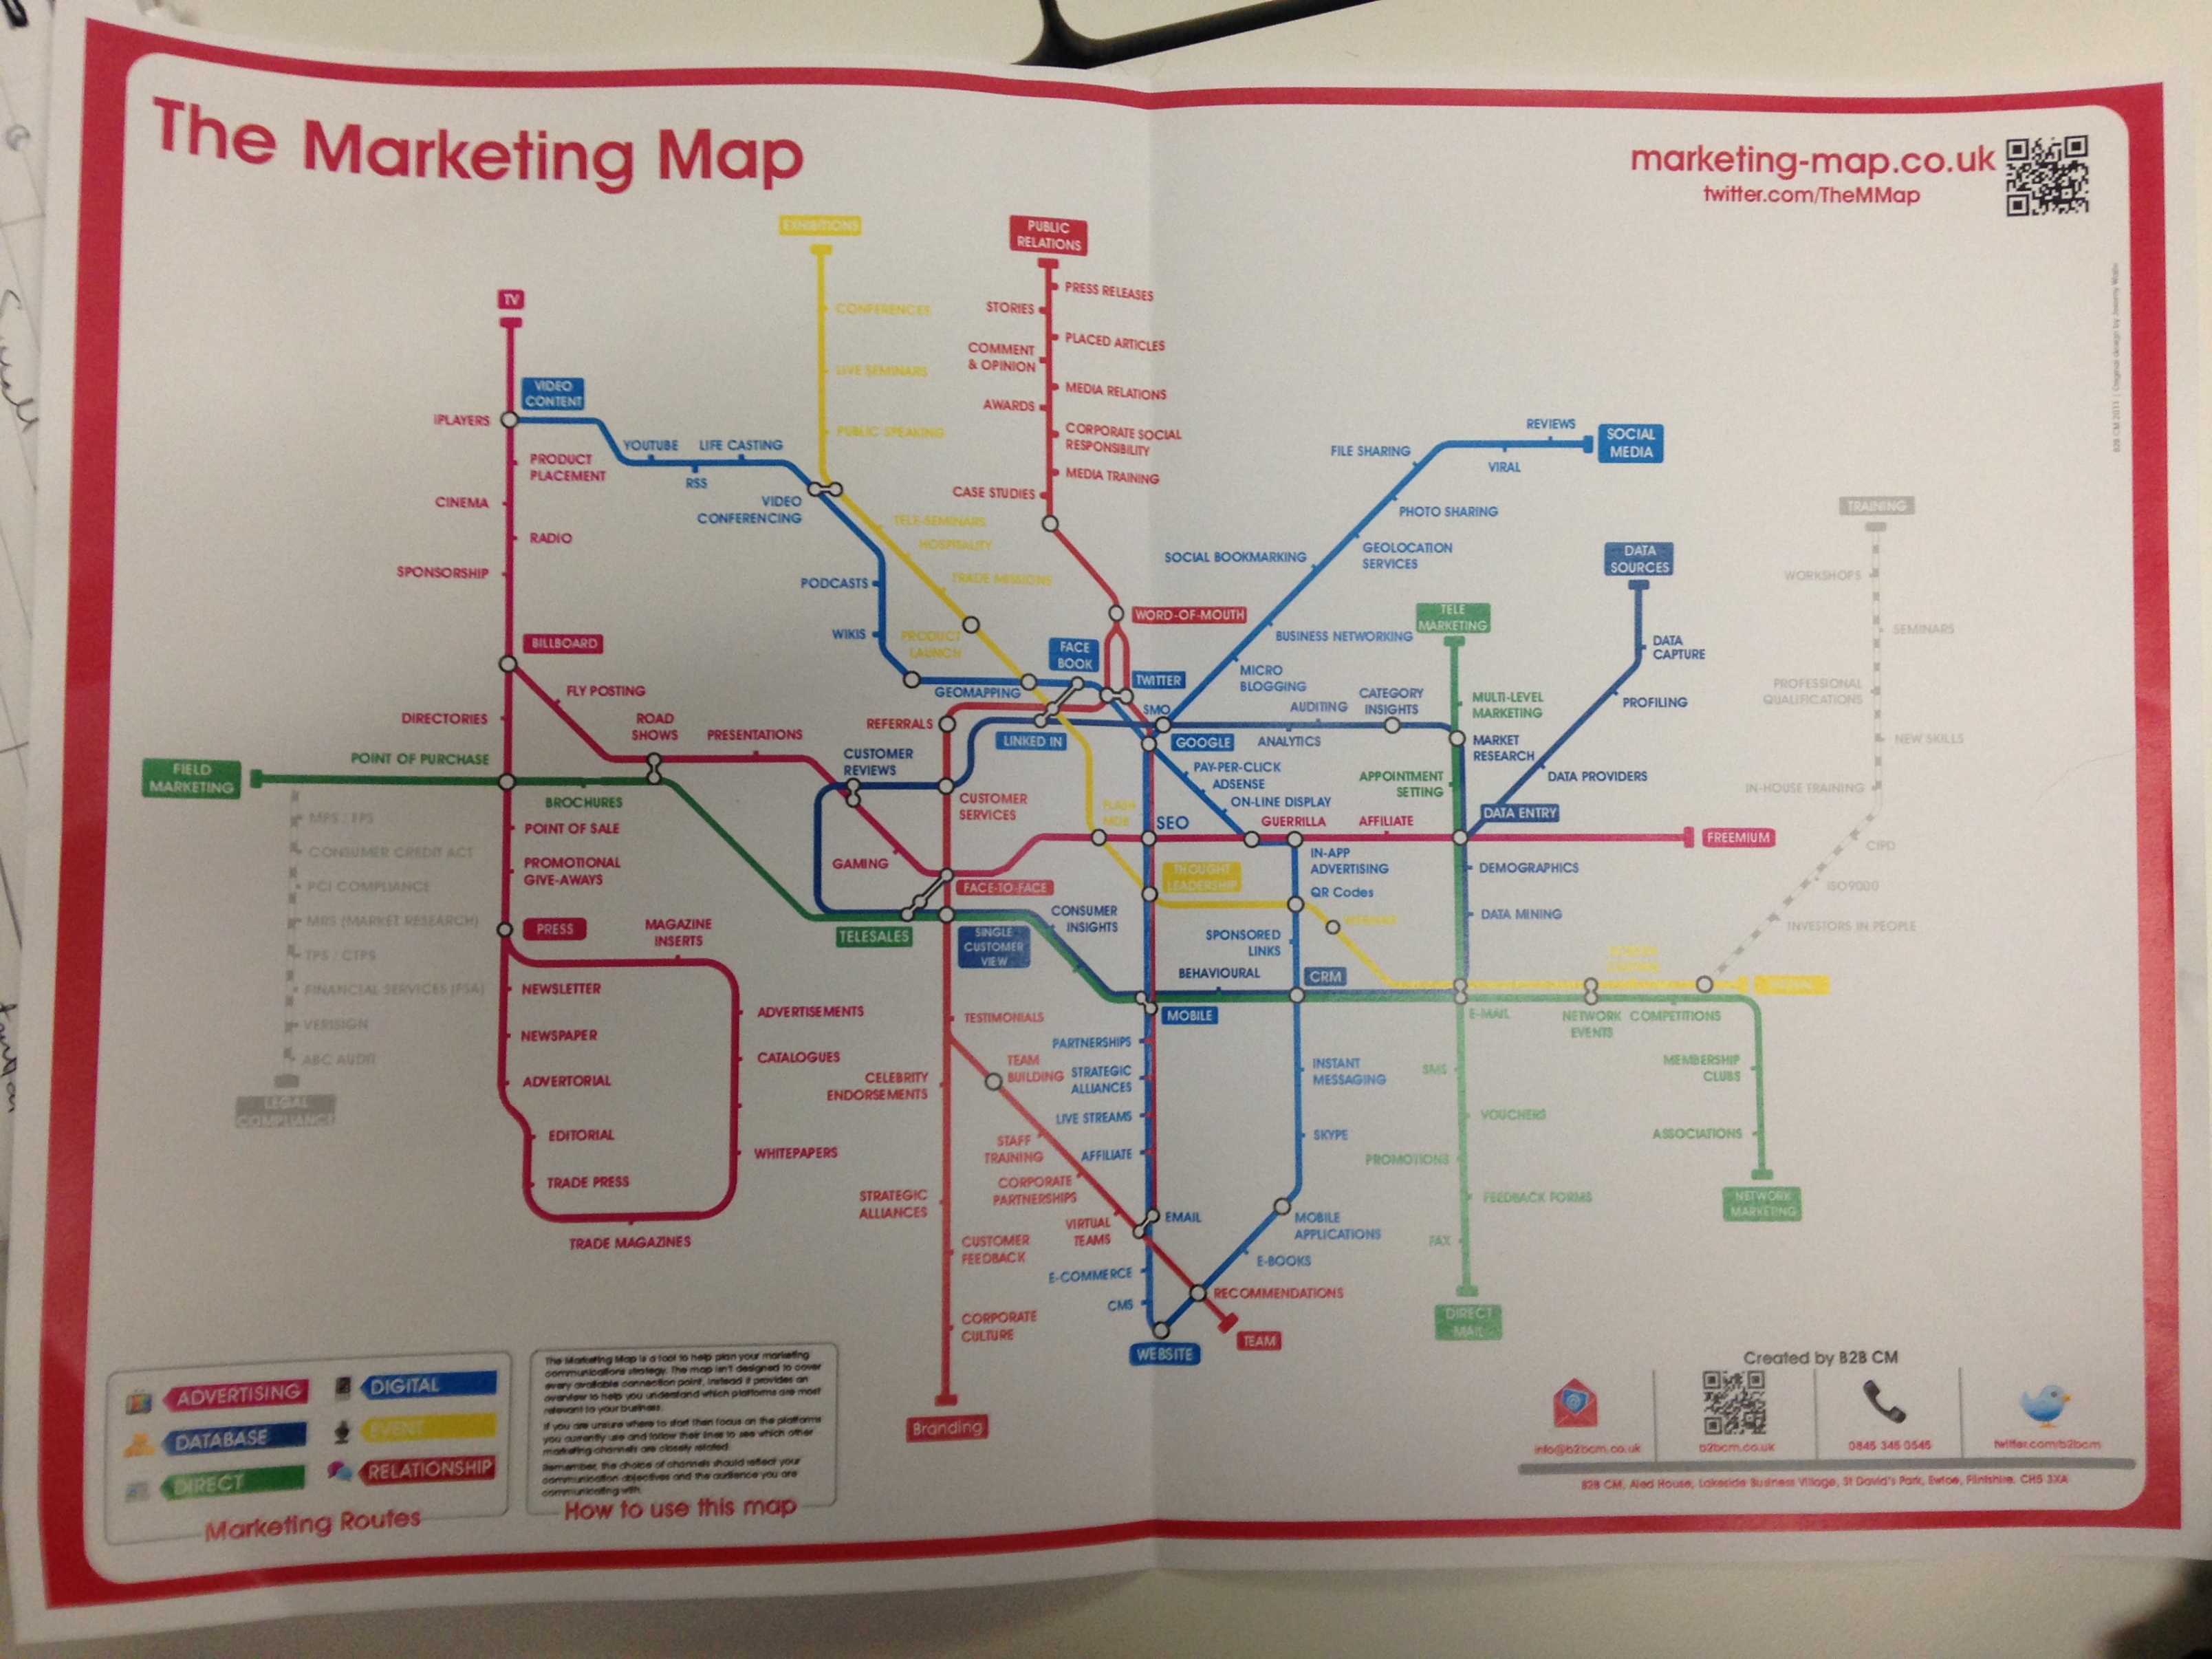 The Marketing Map